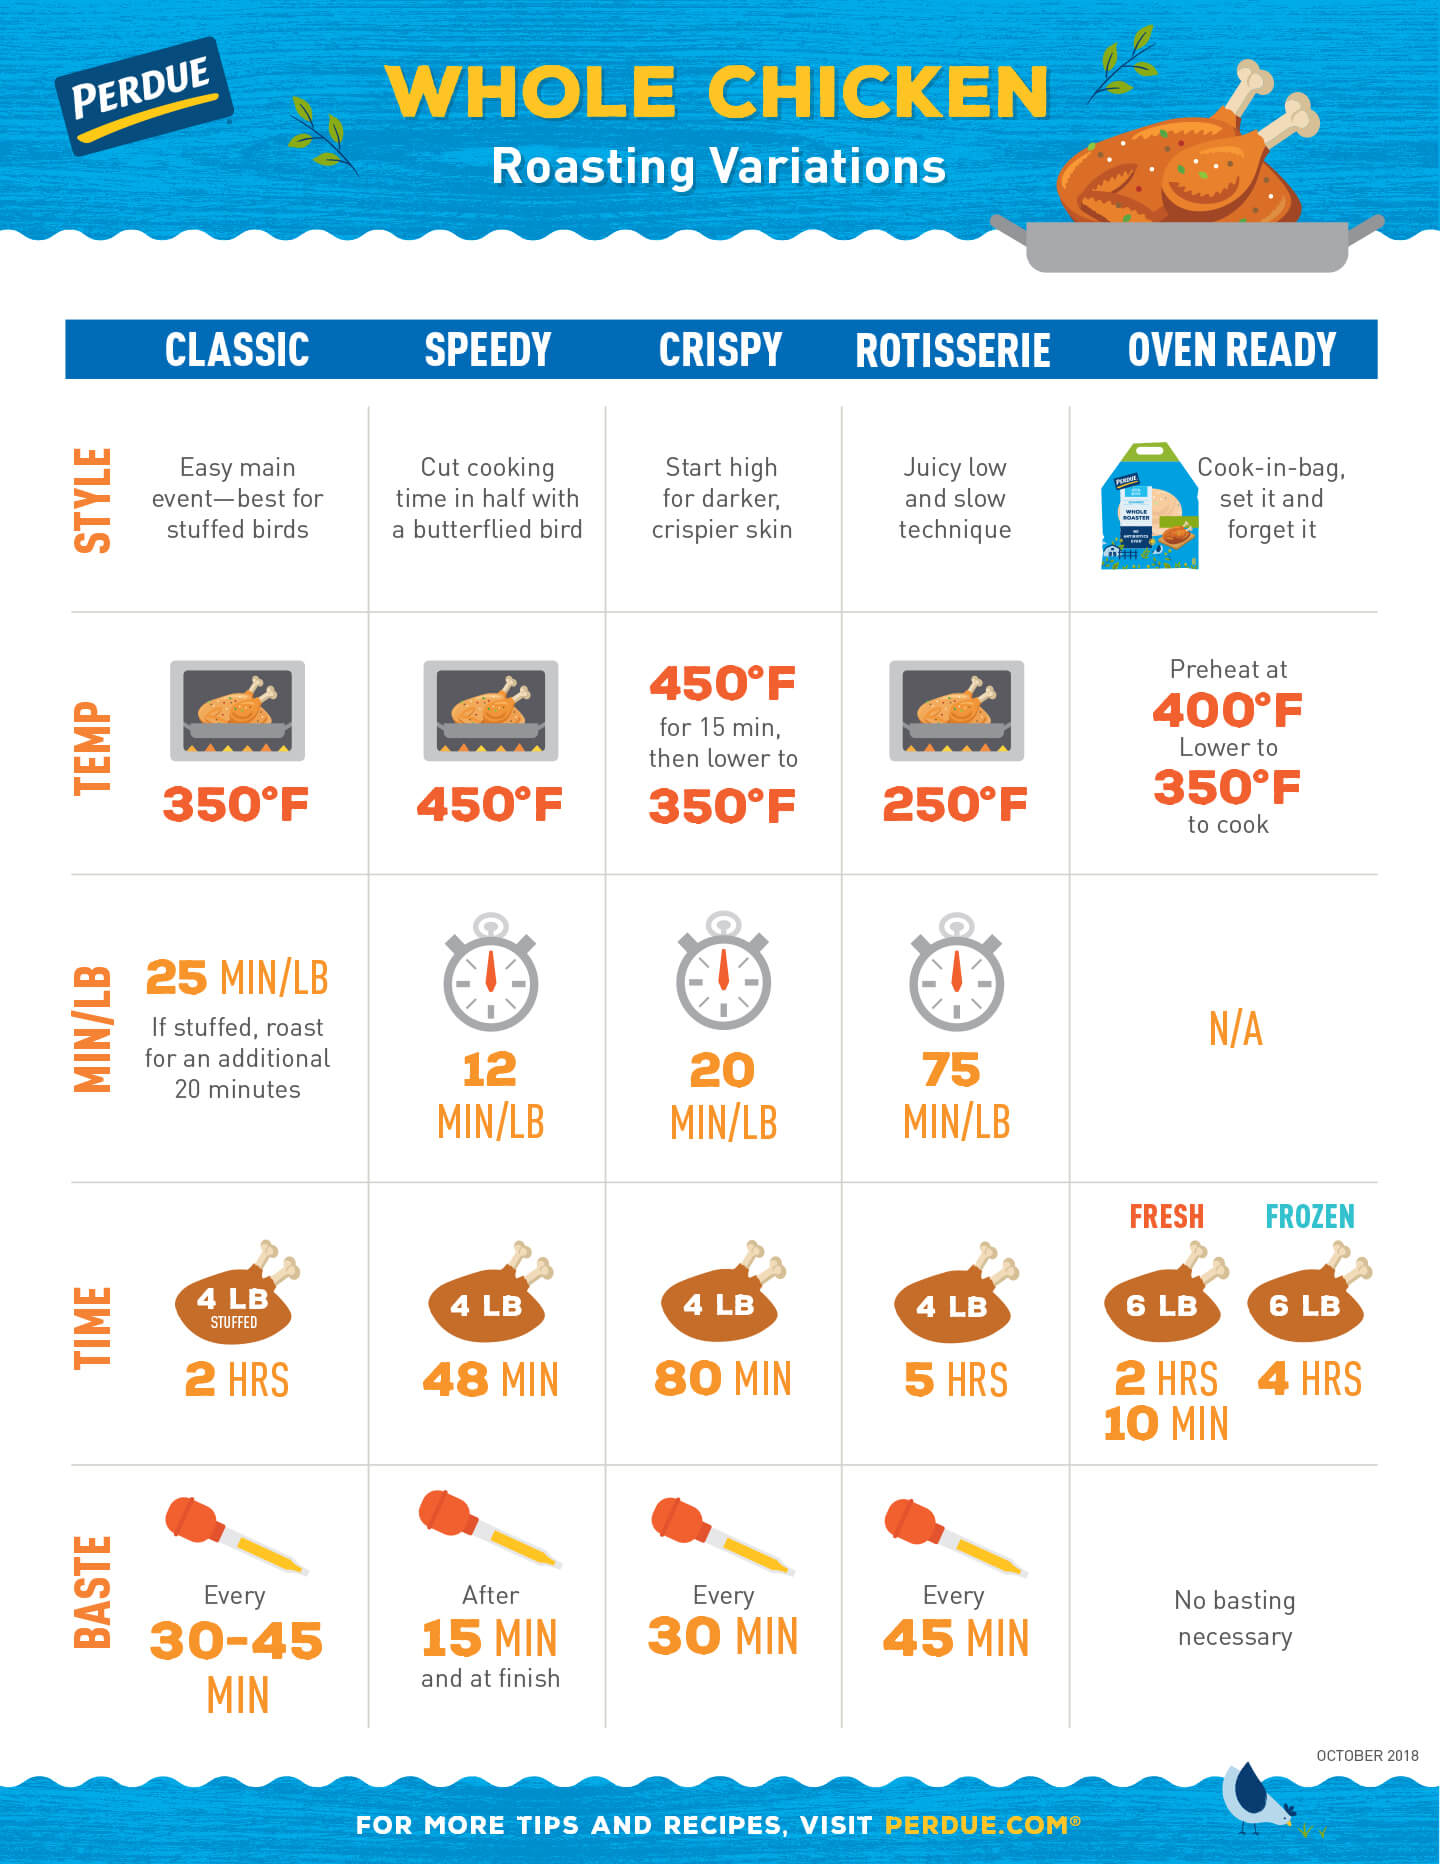 Whole Chicken Roasting Variations Infographic